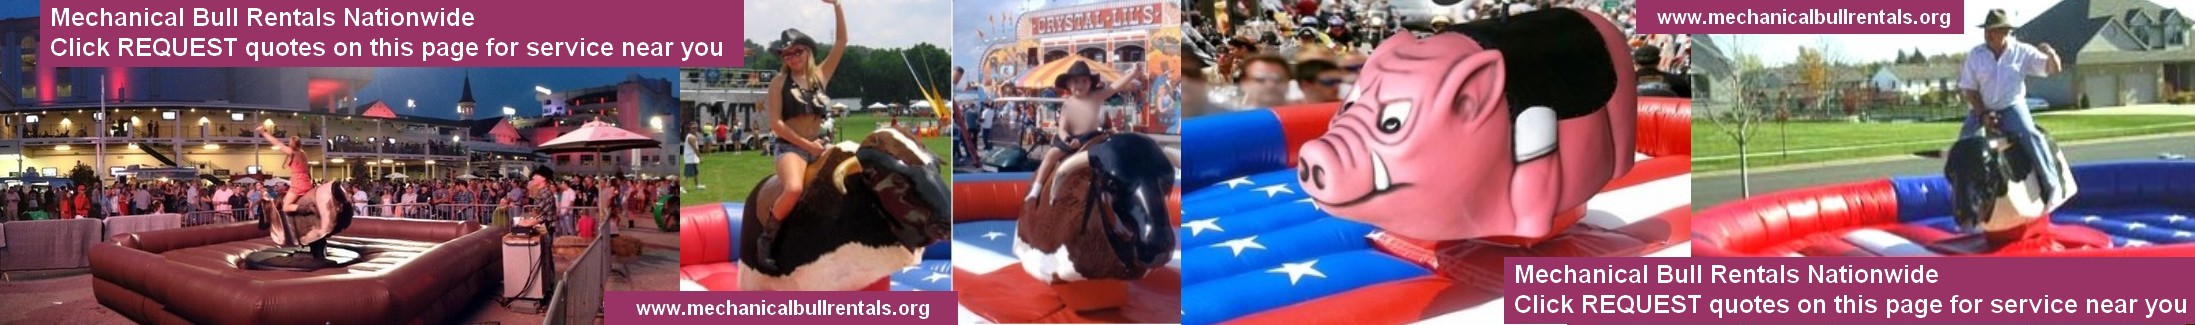 Mechanical Bull Rentals Wilmington Delaware DE and near you. Free referrals to local mechanical bull companies LOGO